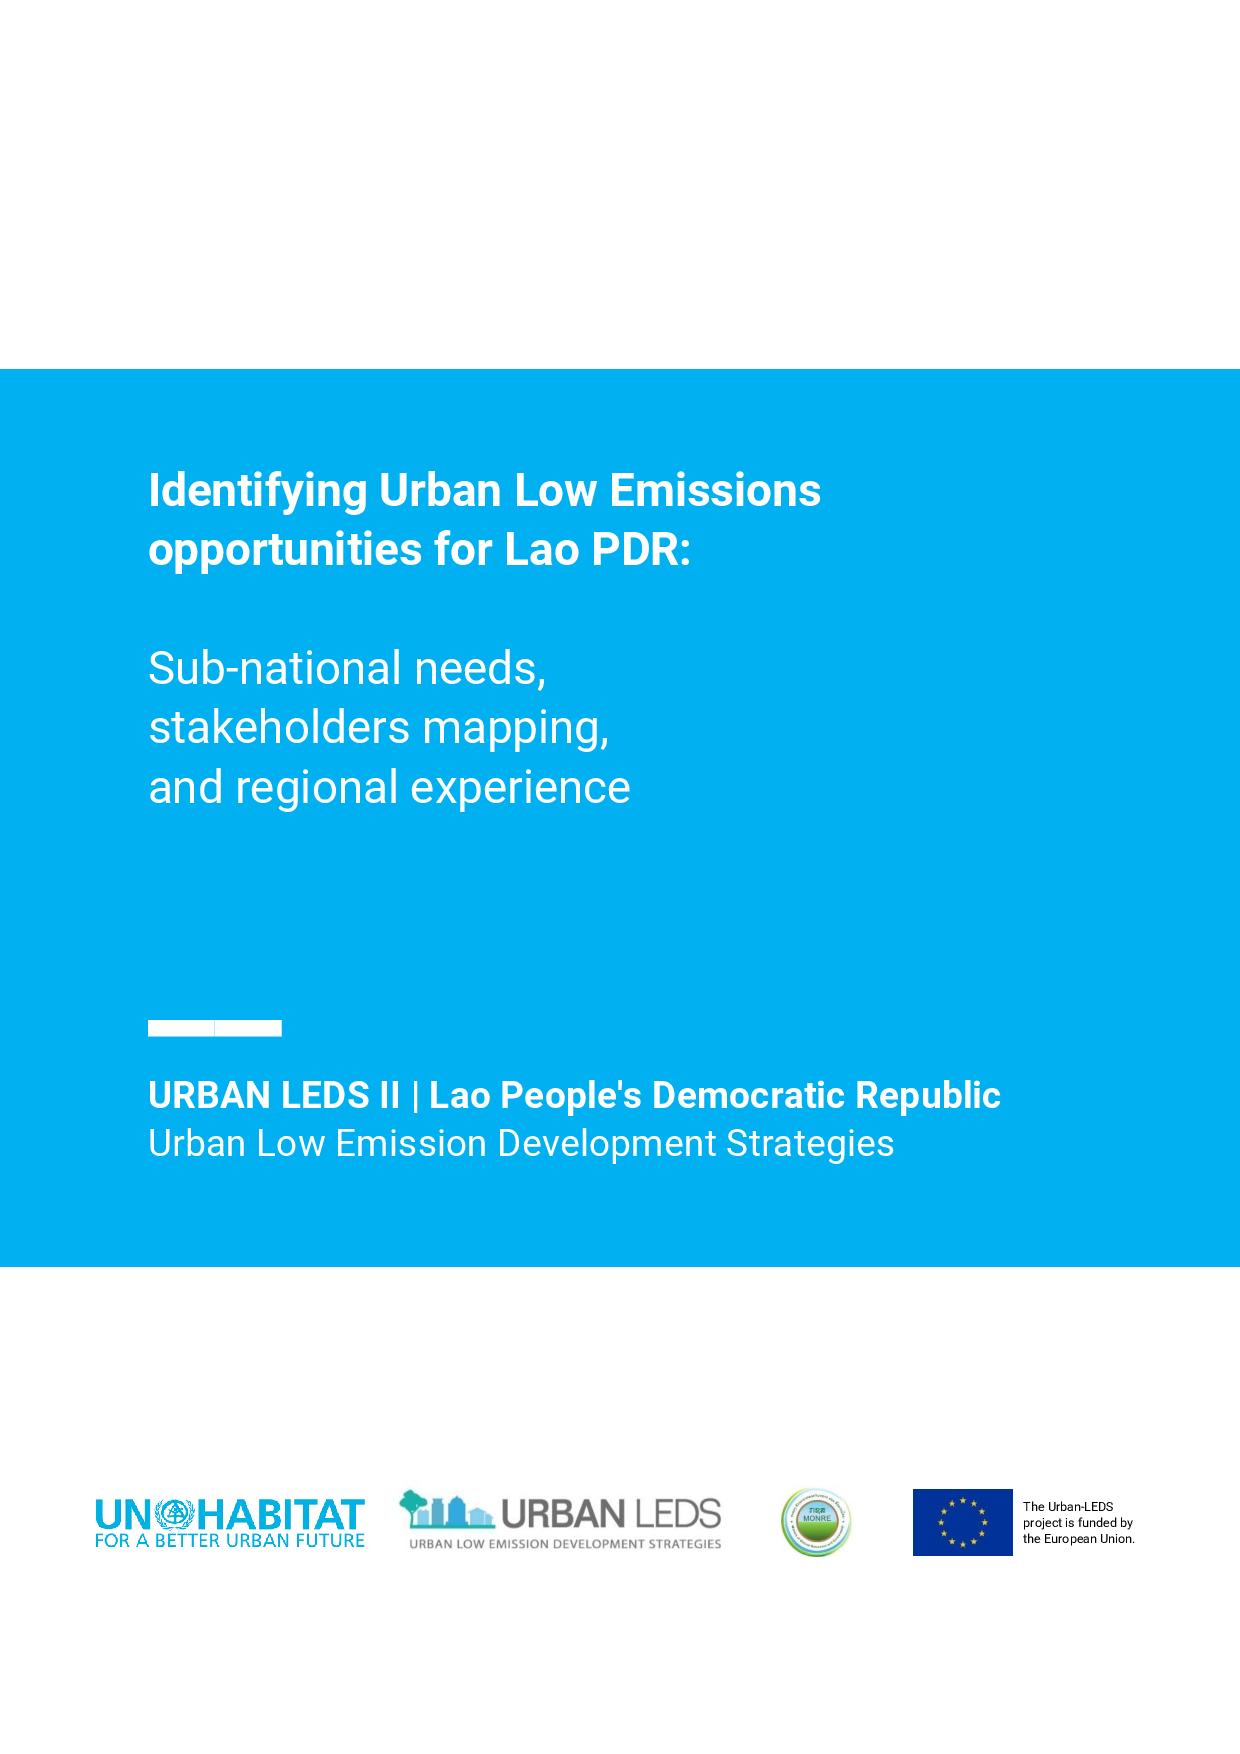 Identifying Urban Low Emissions opportunities for Lao PDR: Sub-national needs, stakeholders mapping, and regional experience (2022)